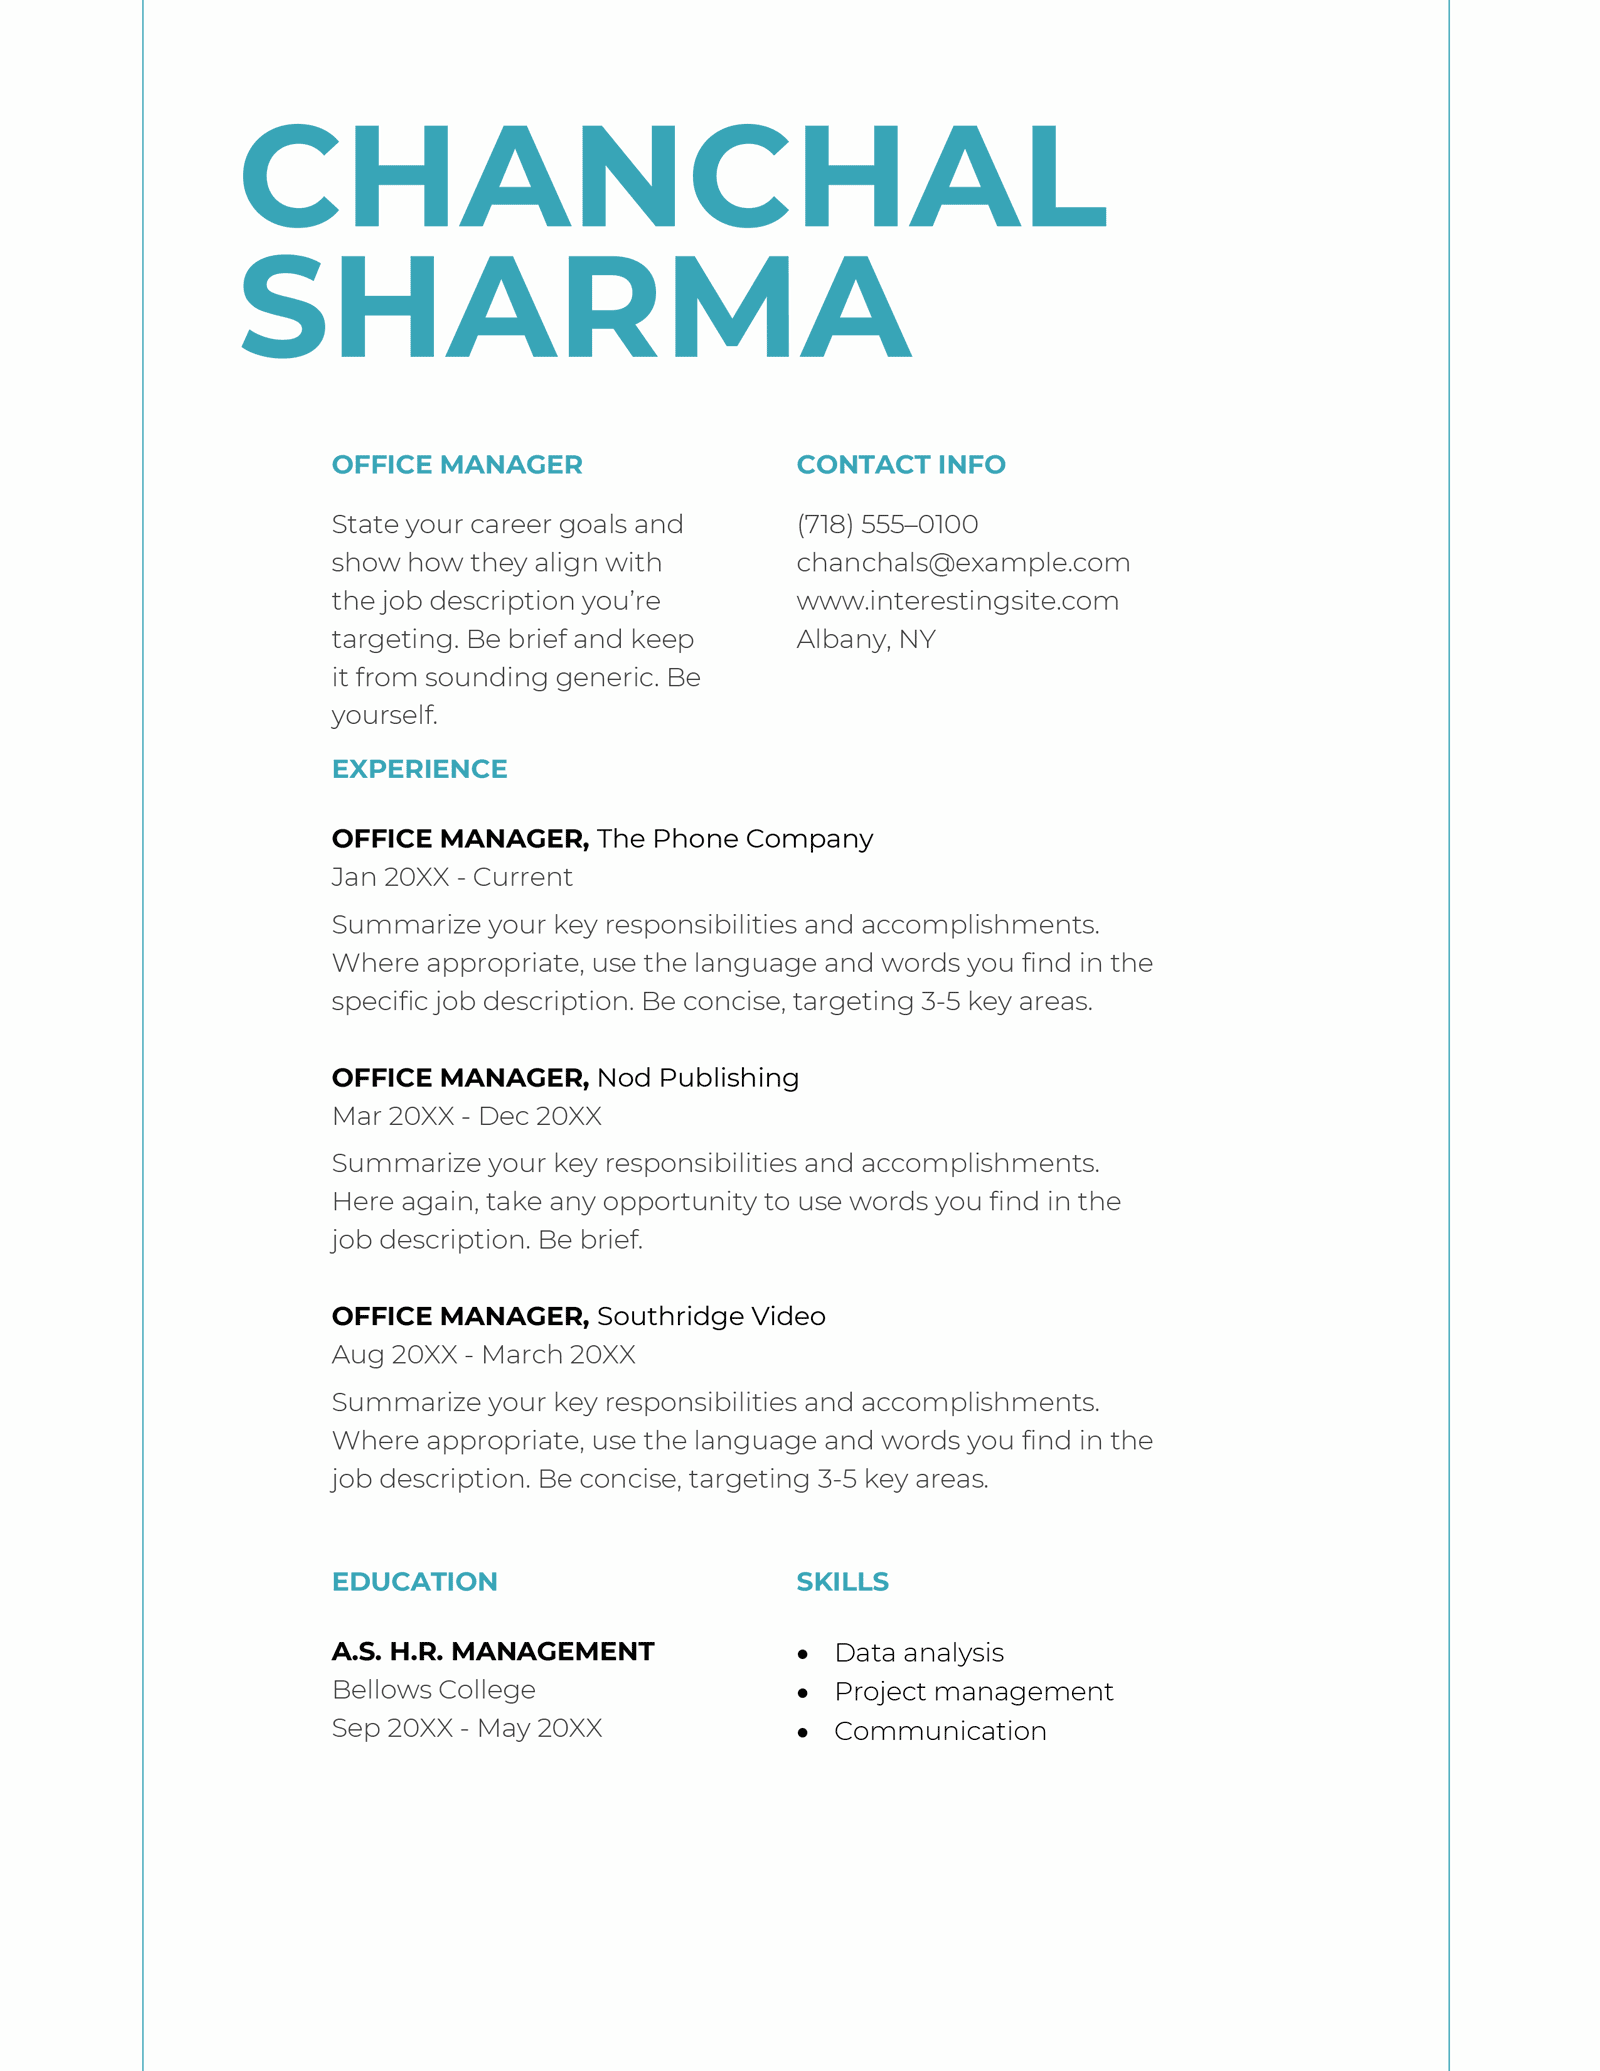 Simple Bold CV template from Microsoft Word with blue section headings and vertical lines that frame the content on either side of the CV.